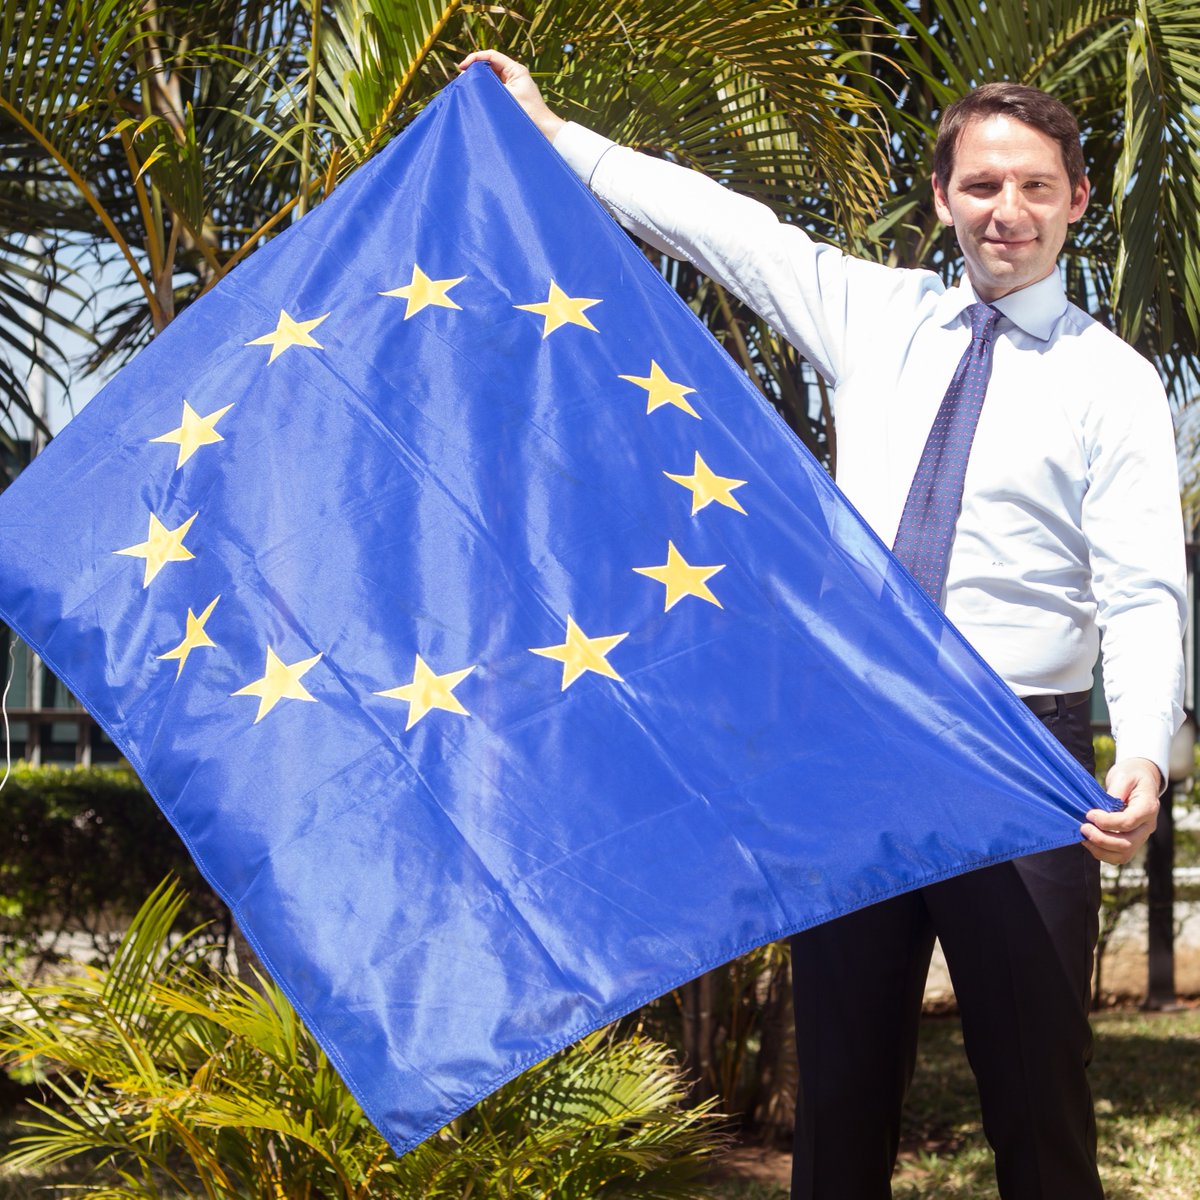 New #EU🇪🇺 Ambassador to Mozambique Antonino Maggiore today started his mission, expressed the desire to  learn more about this country  and
people and to contribute to advancing the excellent links between the European Union and Mozambique.  #TeamEurope #EUinTheWorld  @eu_eeas